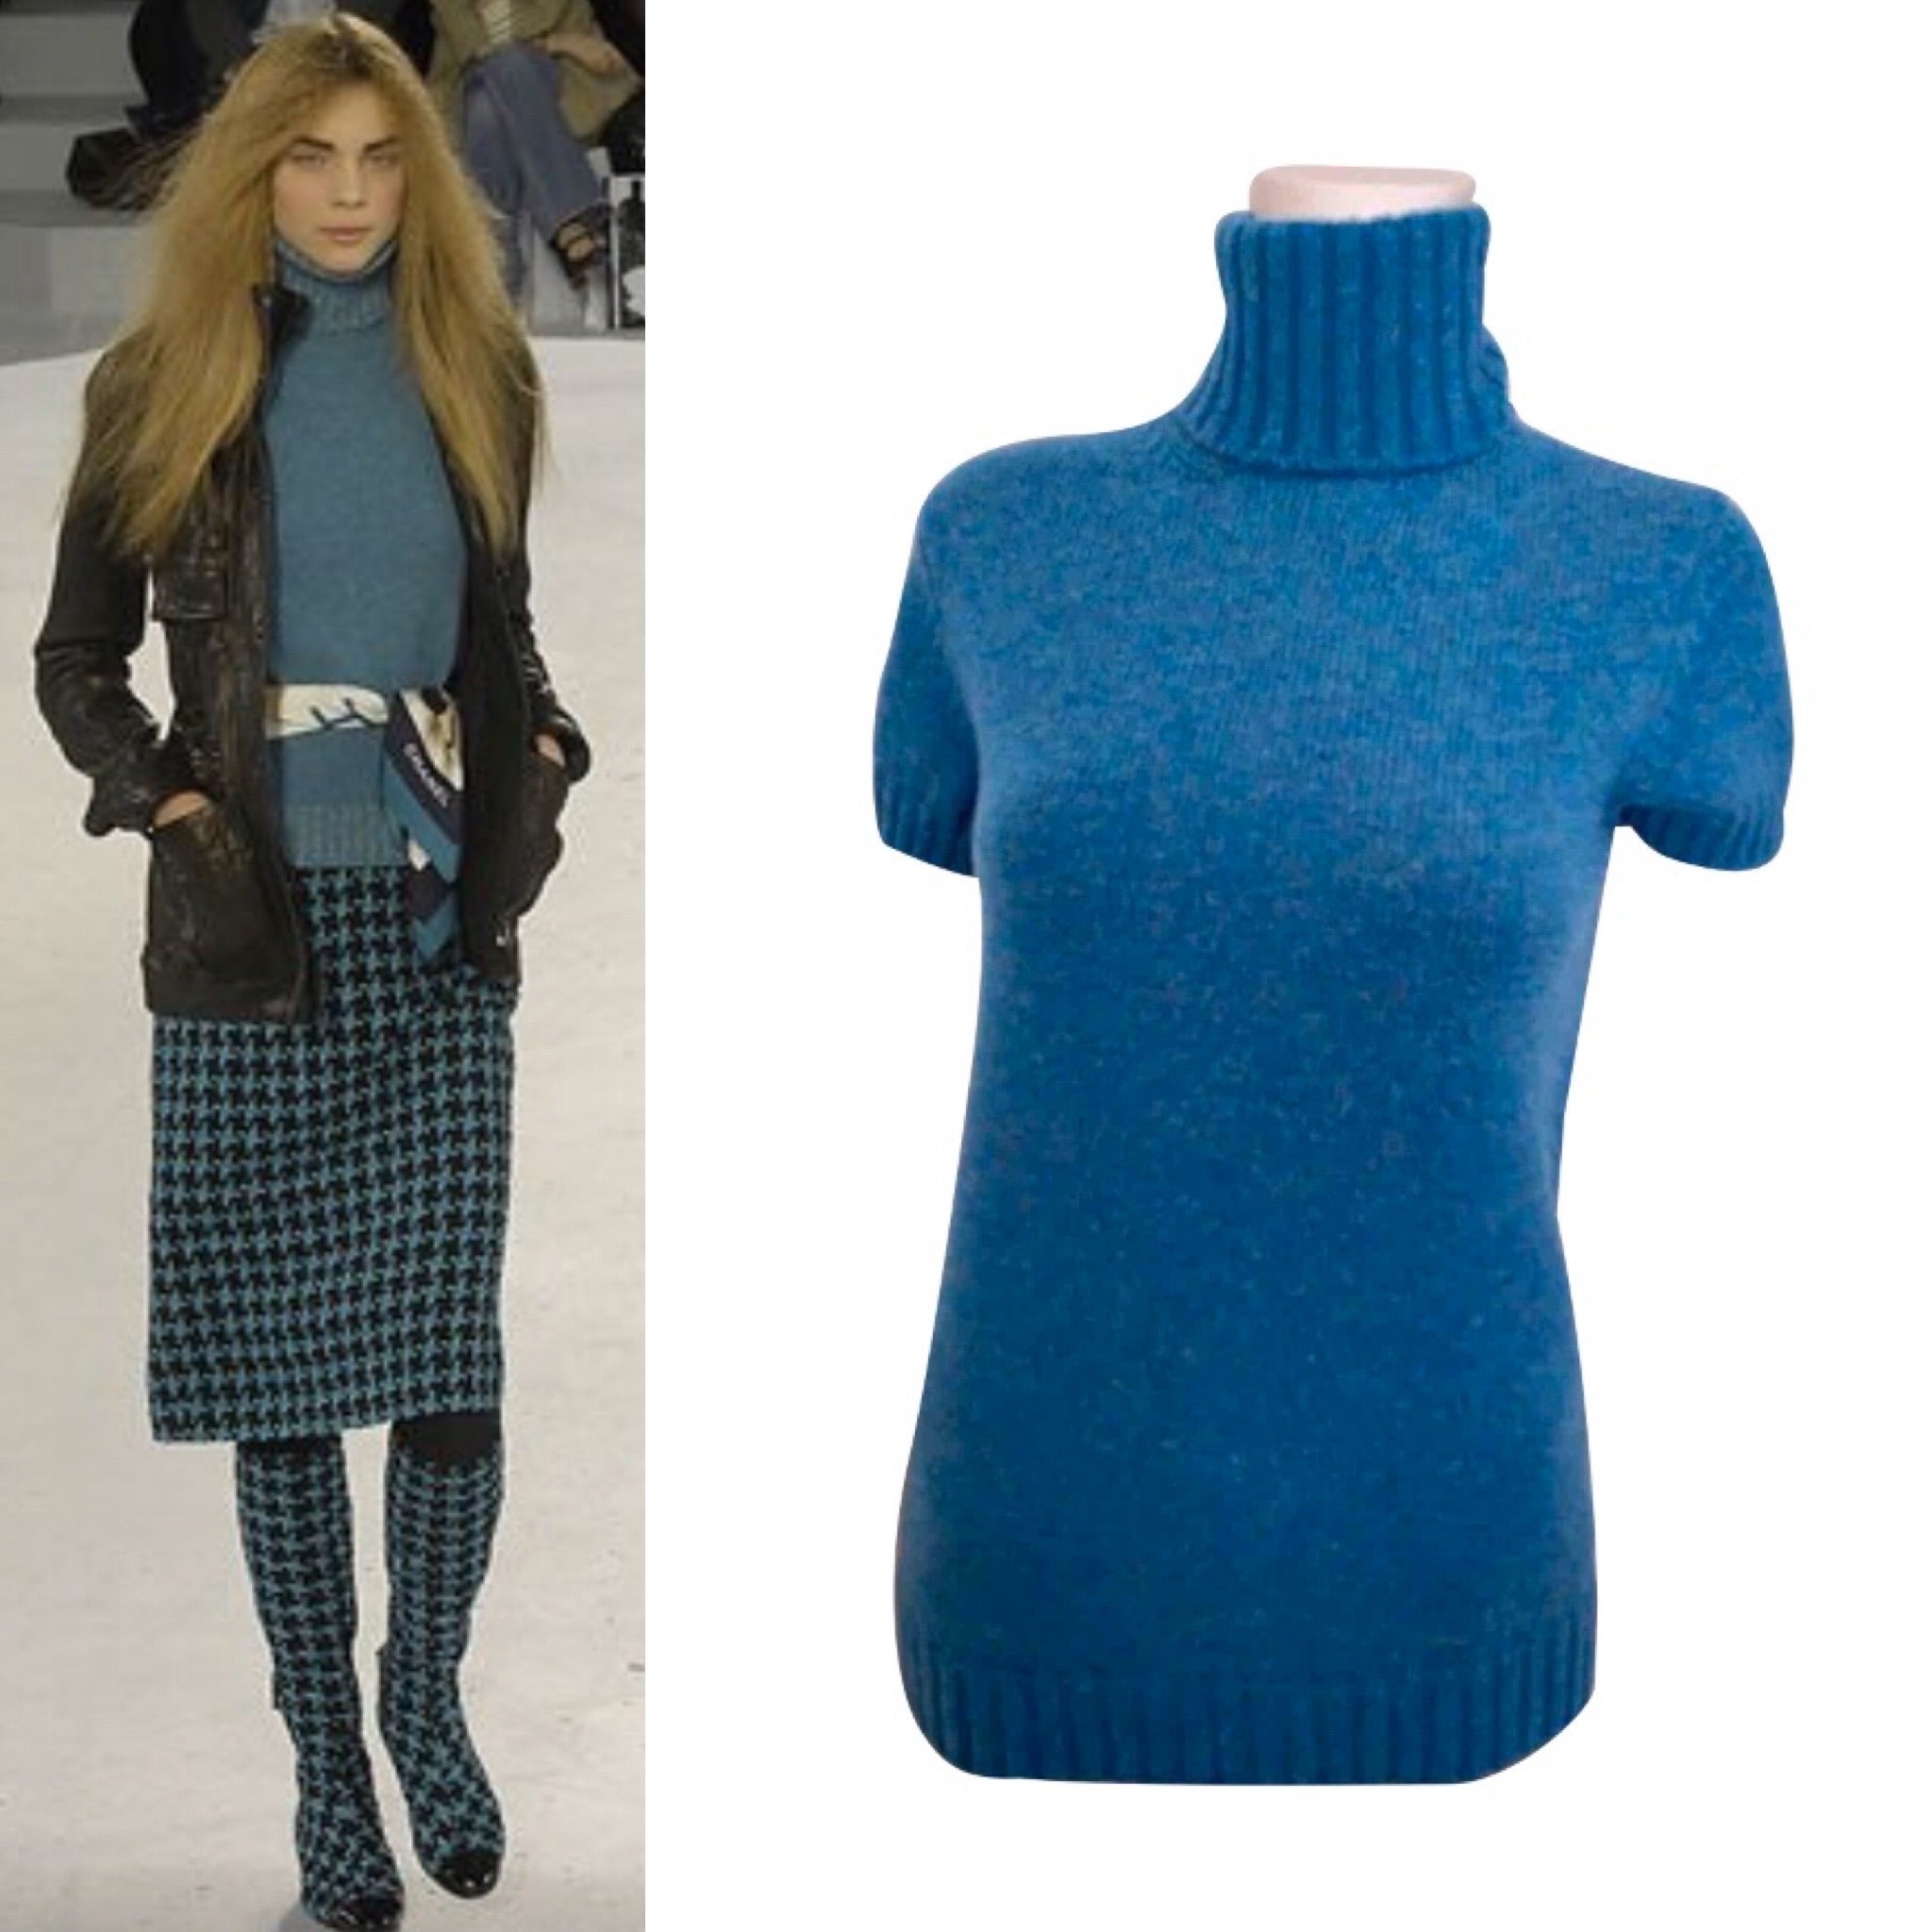 HelensChanel Chanel 07A 2007 Fall Short Sleeve Turquoise Pullover Turtleneck Sweater Top Blouse FR 40 US 6/8